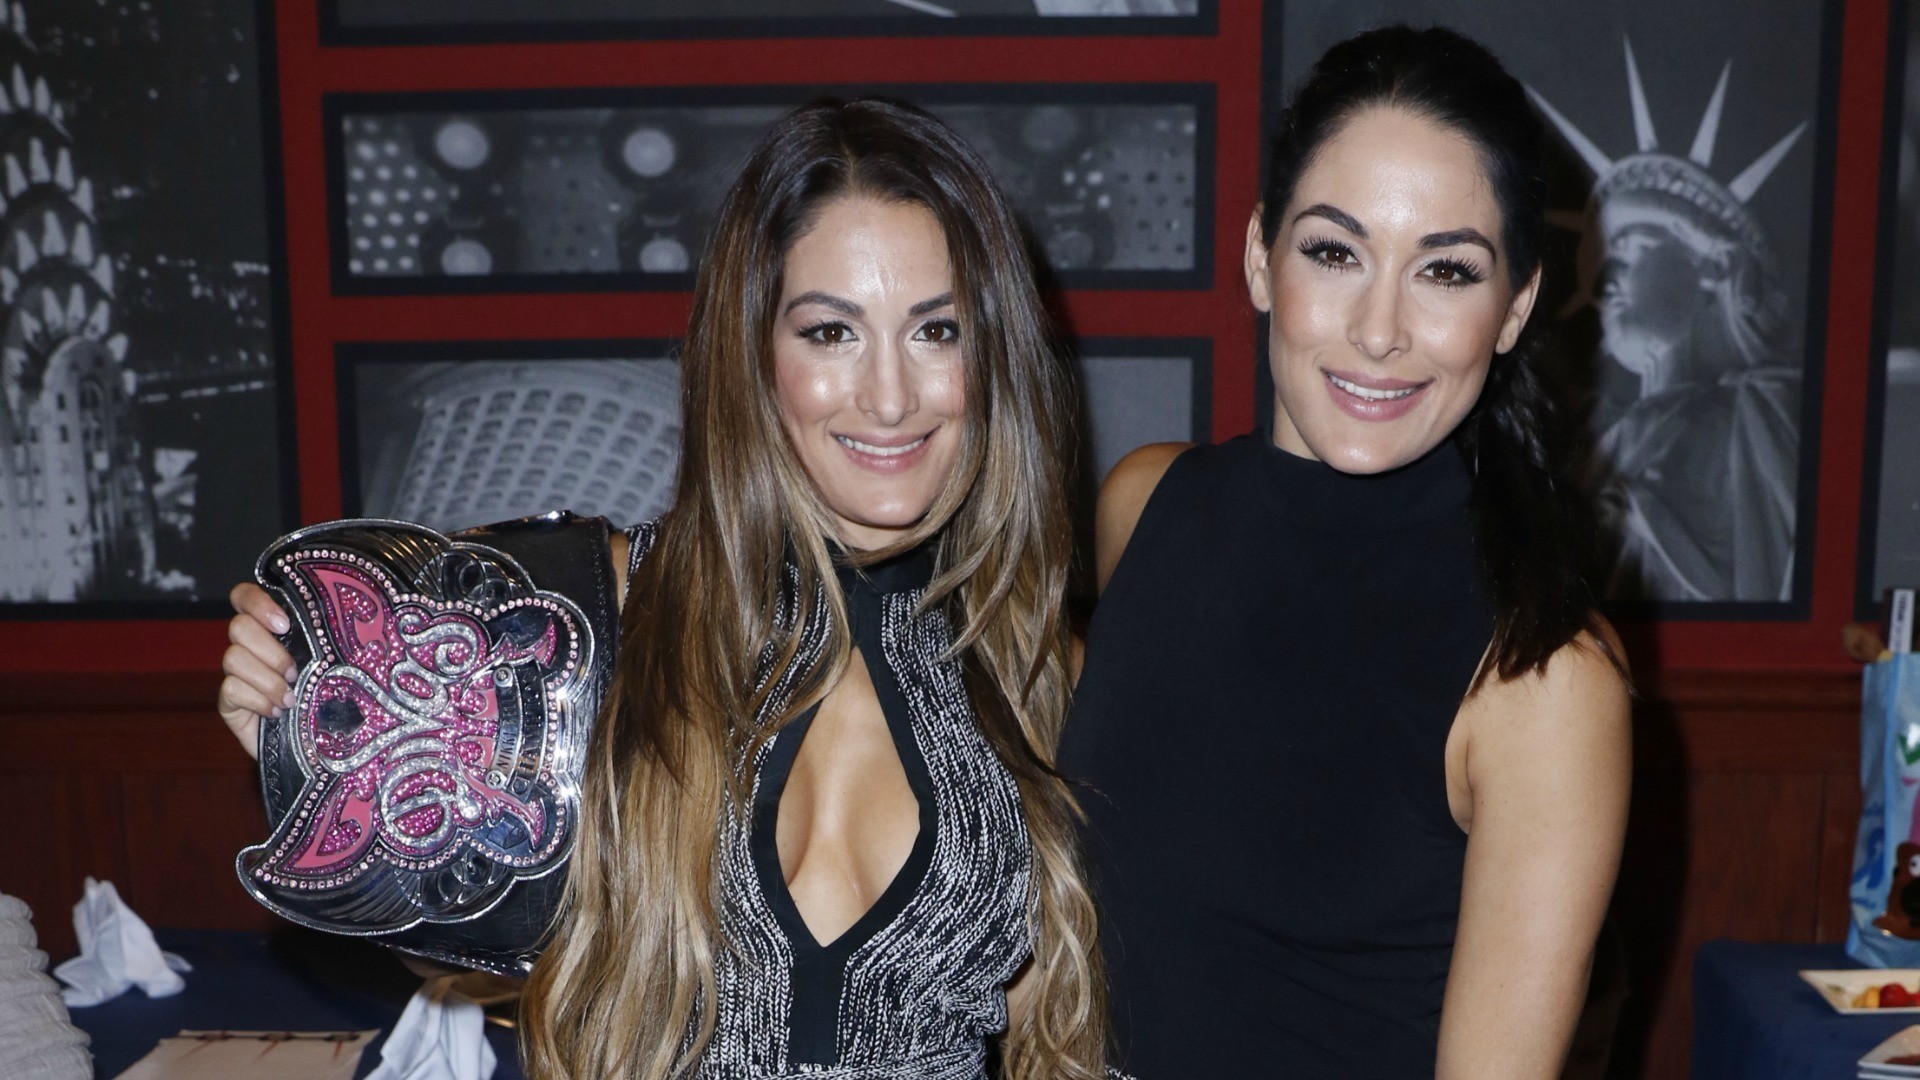 1920x1080 Nikki and Brie Bella nab their own series, but John Cena seems to be running